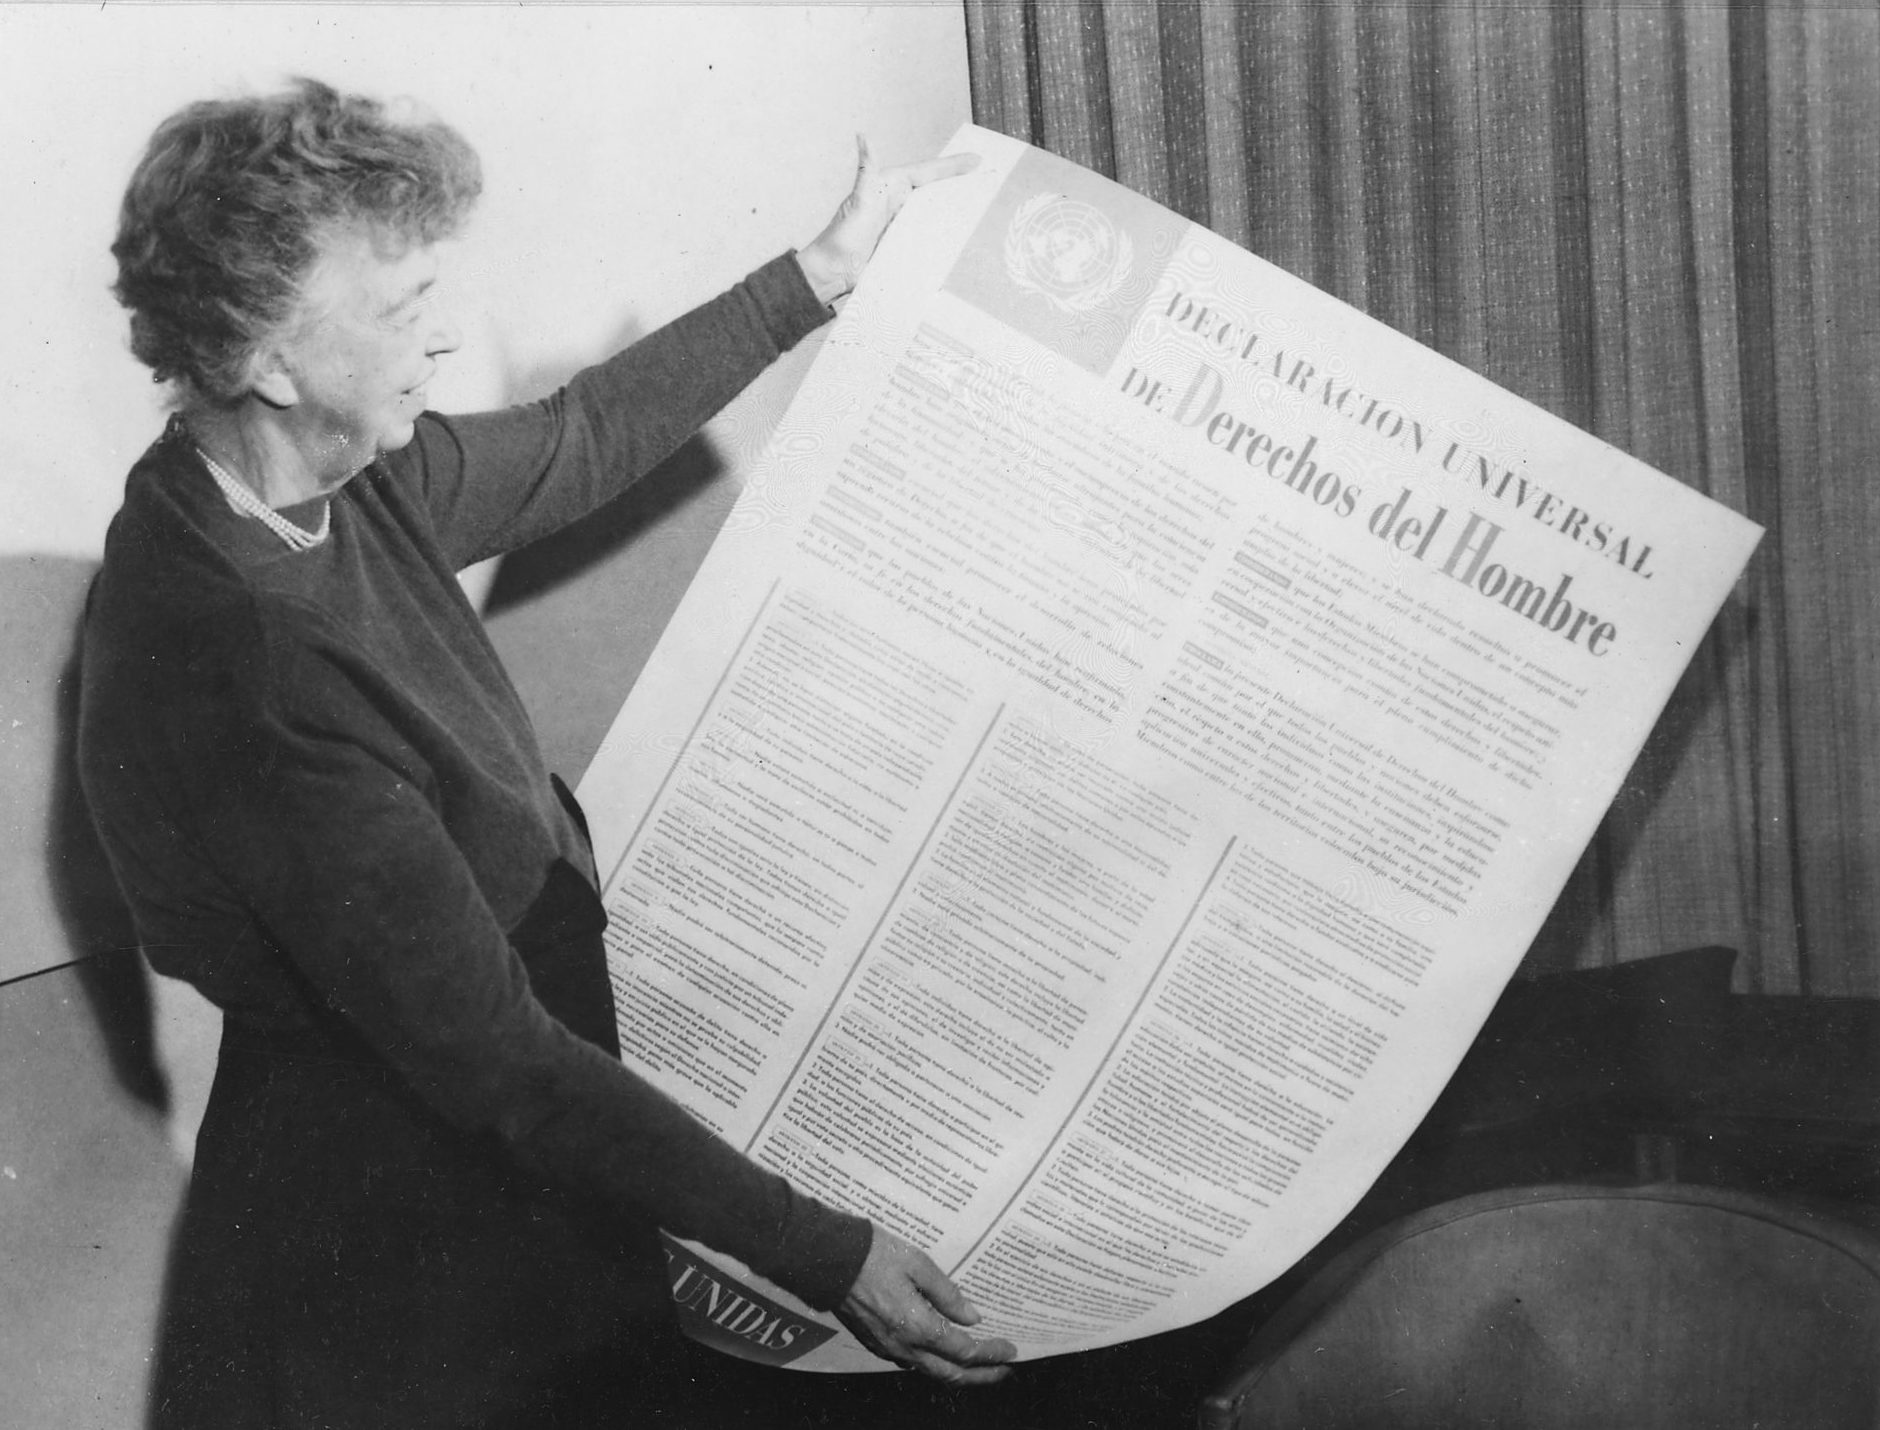 Human Rights in the Balance: The Universal Declaration of Human Rights 70 Years On